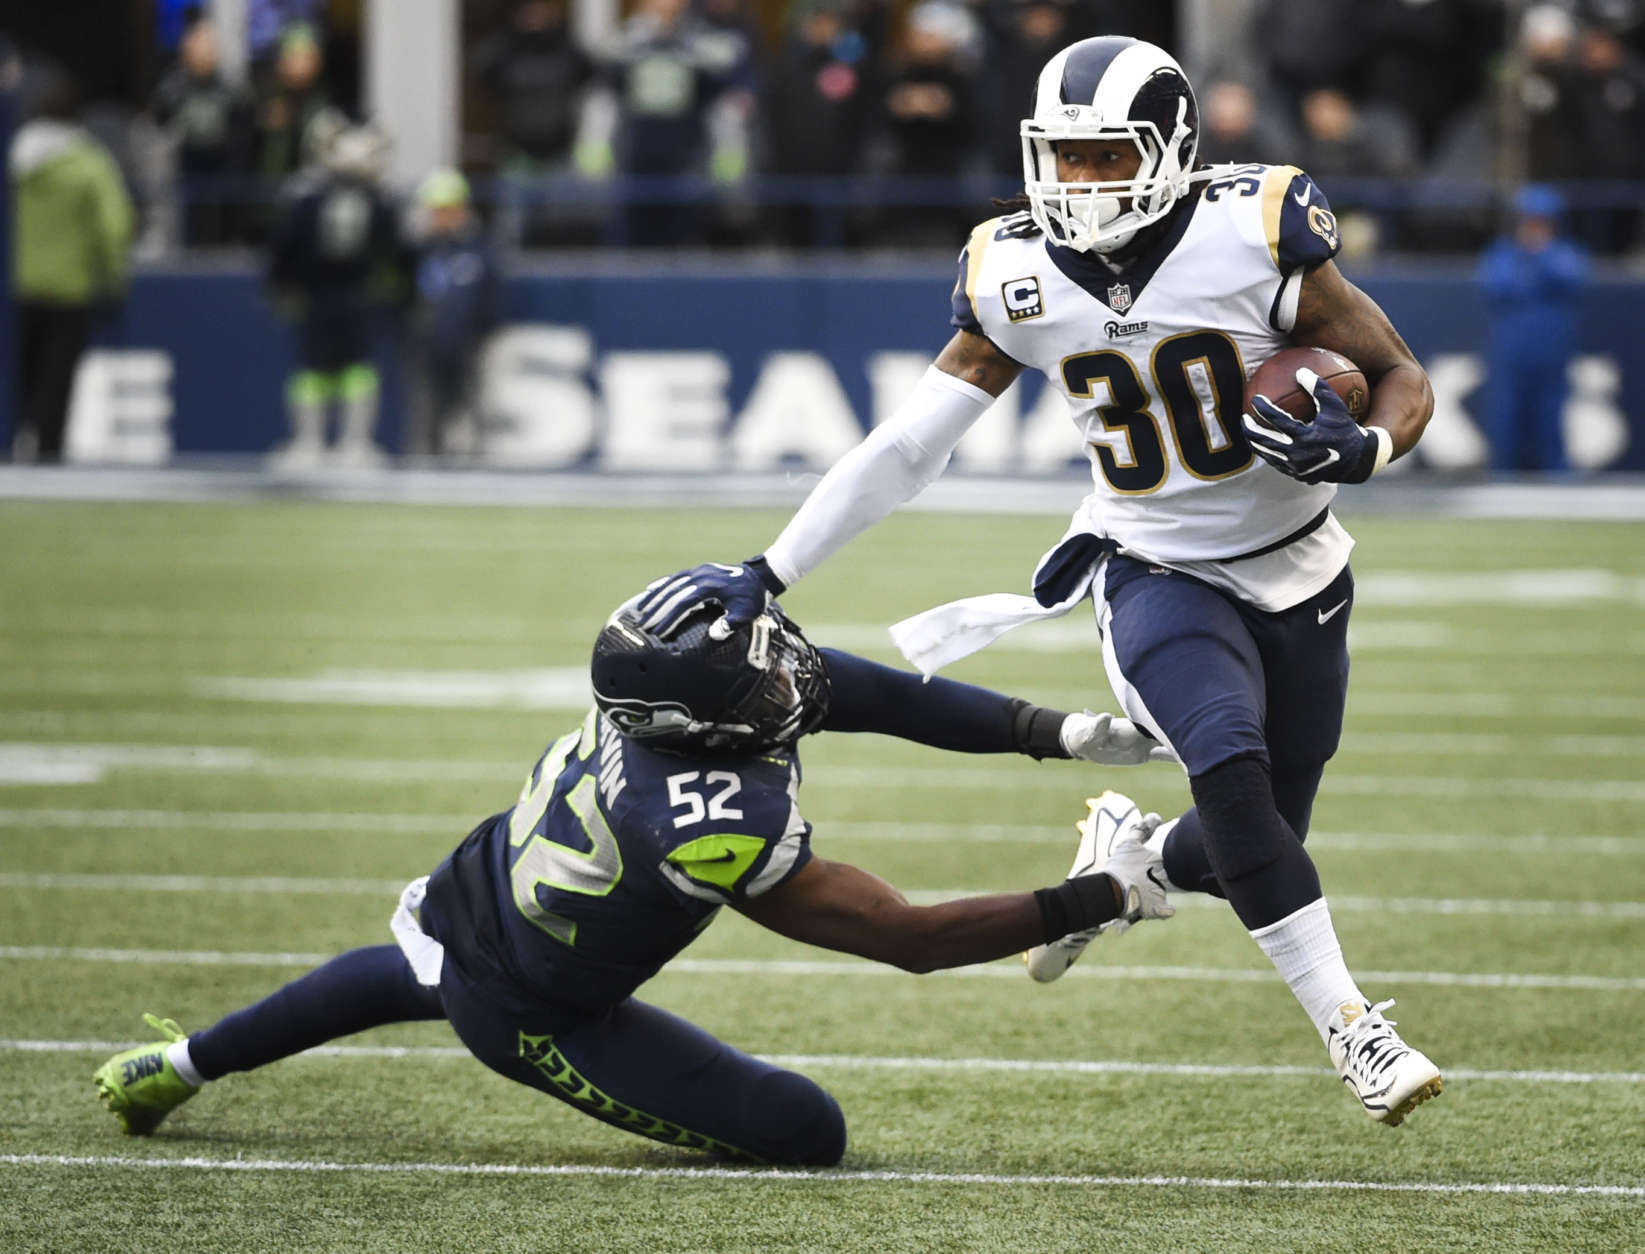 SEATTLE, WA - DECEMBER 17:  Running back Todd Gurley #30 of the Los Angeles Rams is tackled by linebacker Terence Garvin #52 of the Seattle Seahawks during the 2nd quarter of the game at CenturyLink Field on December 17, 2017 in Seattle, Washington.  (Photo by Steve Dykes/Getty Images)